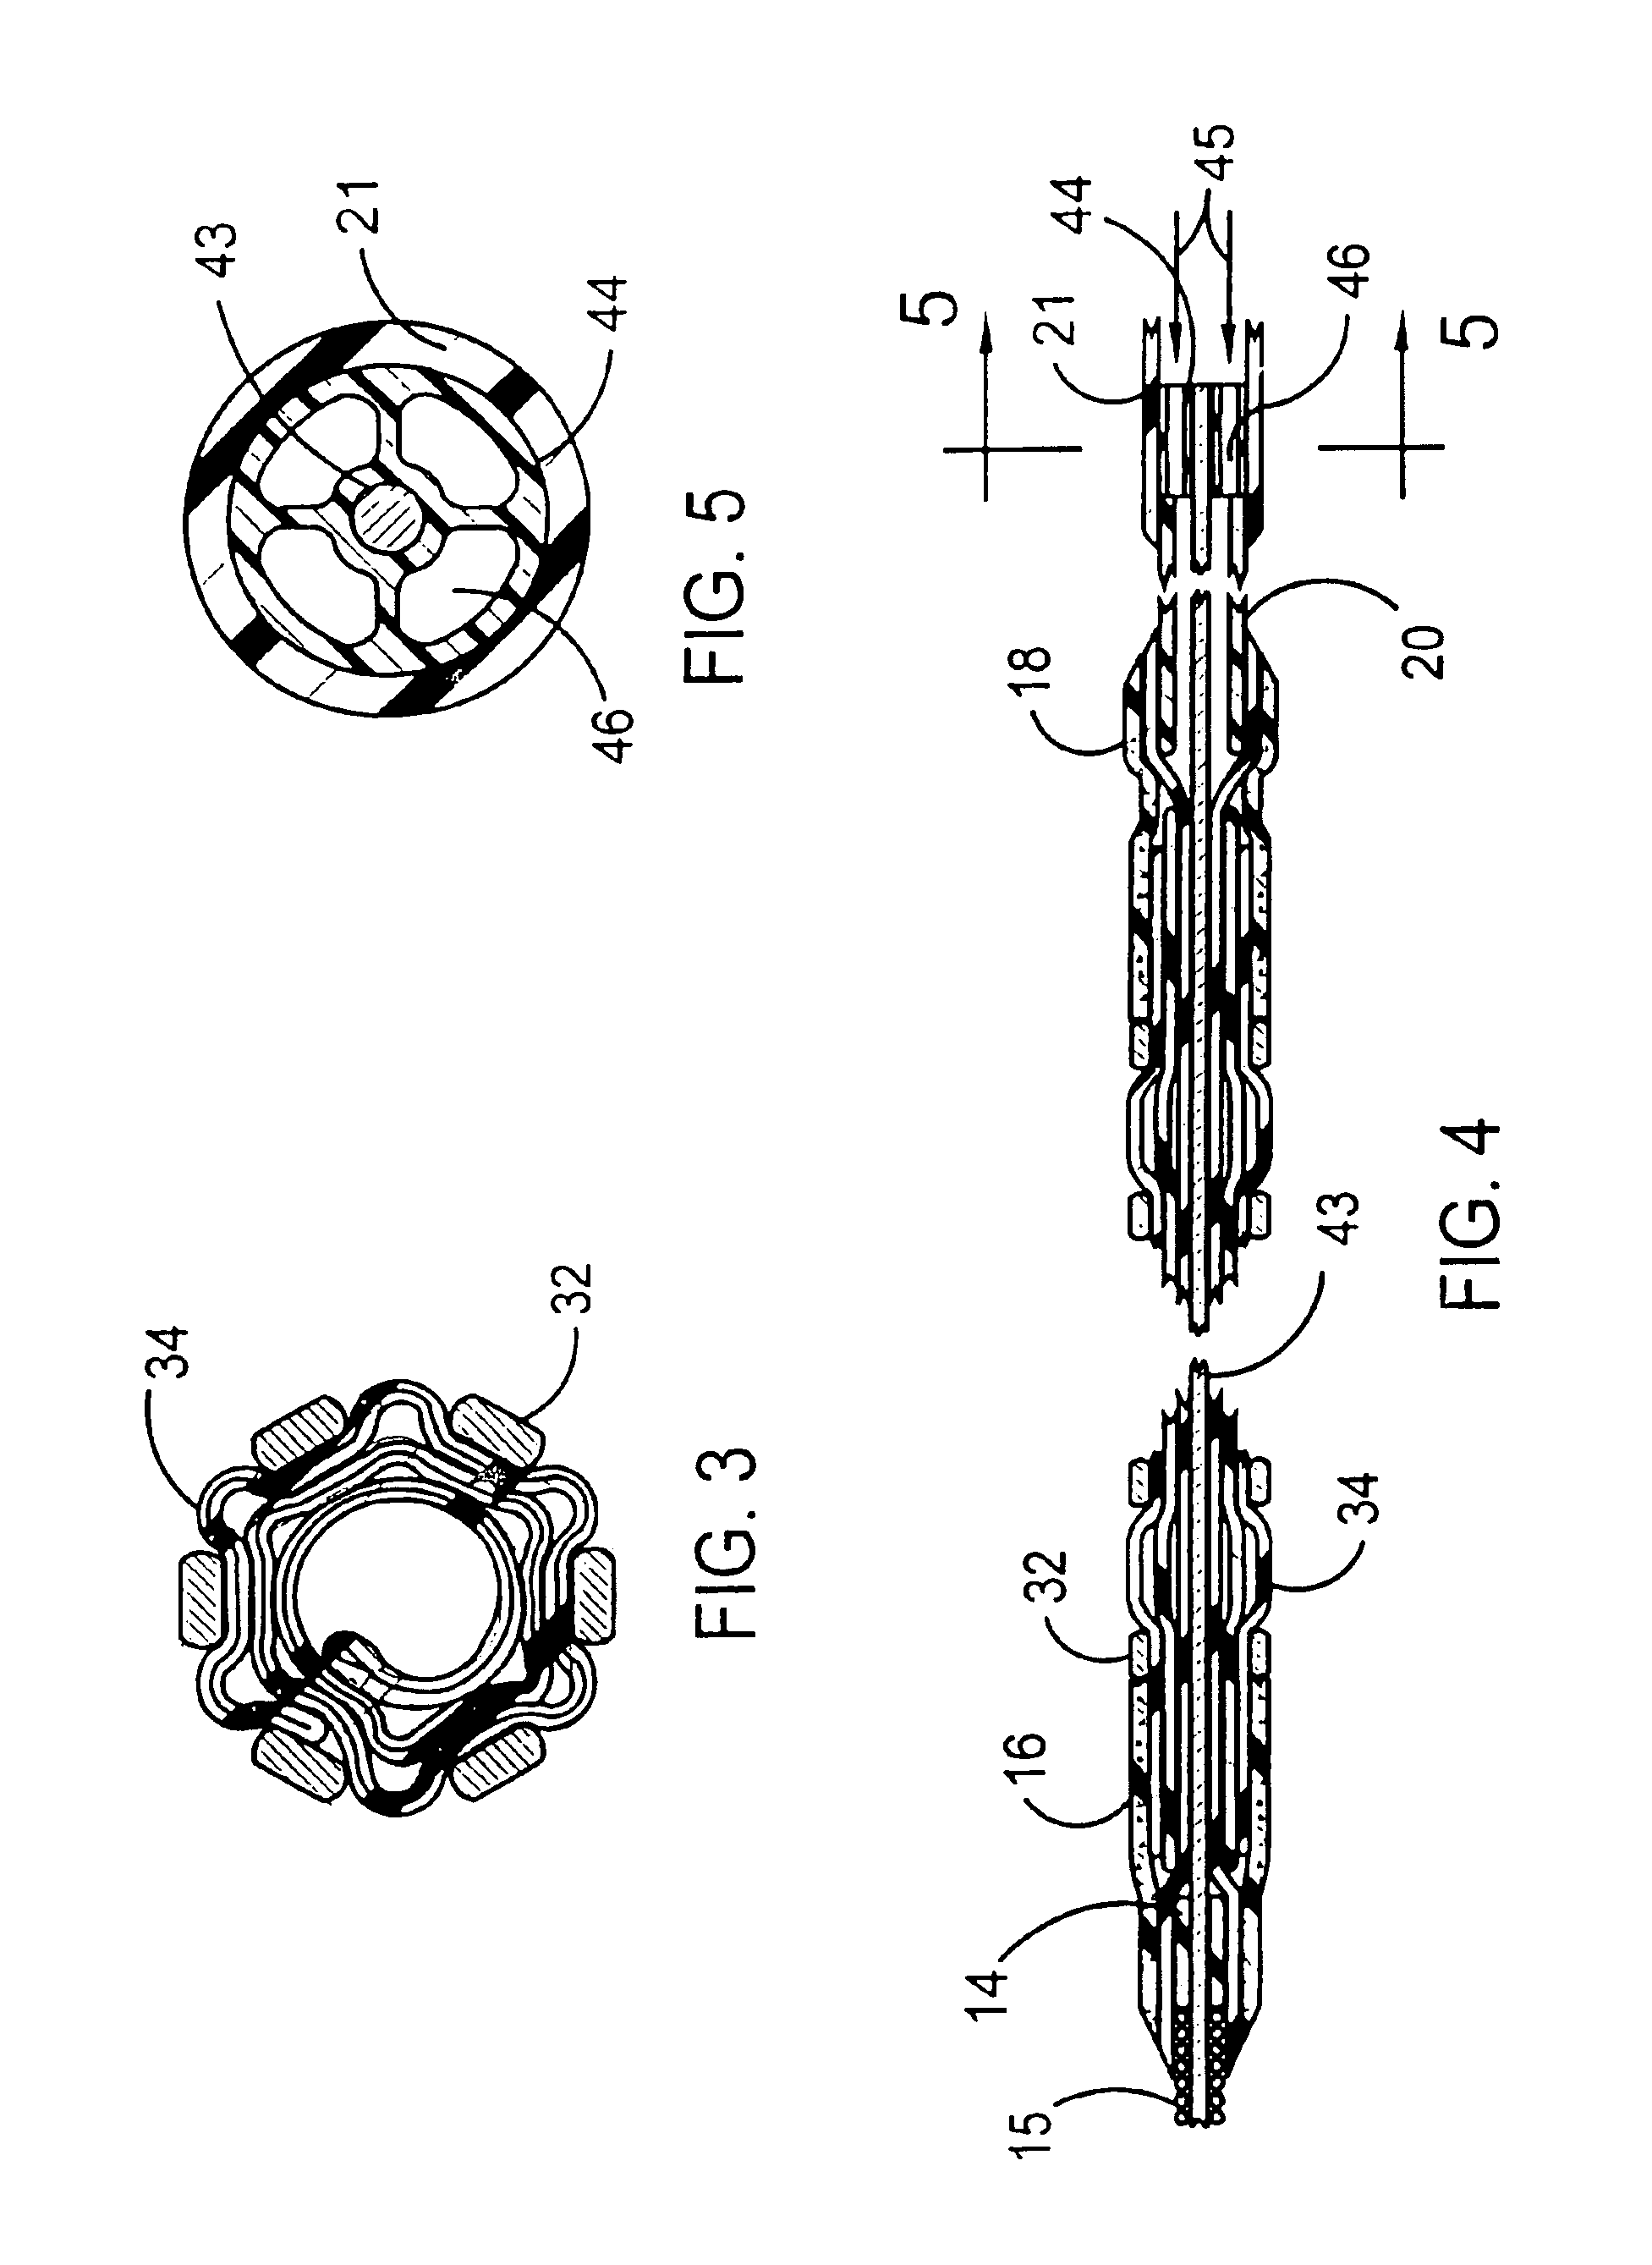 Stent delivery system having a fixed guidewire